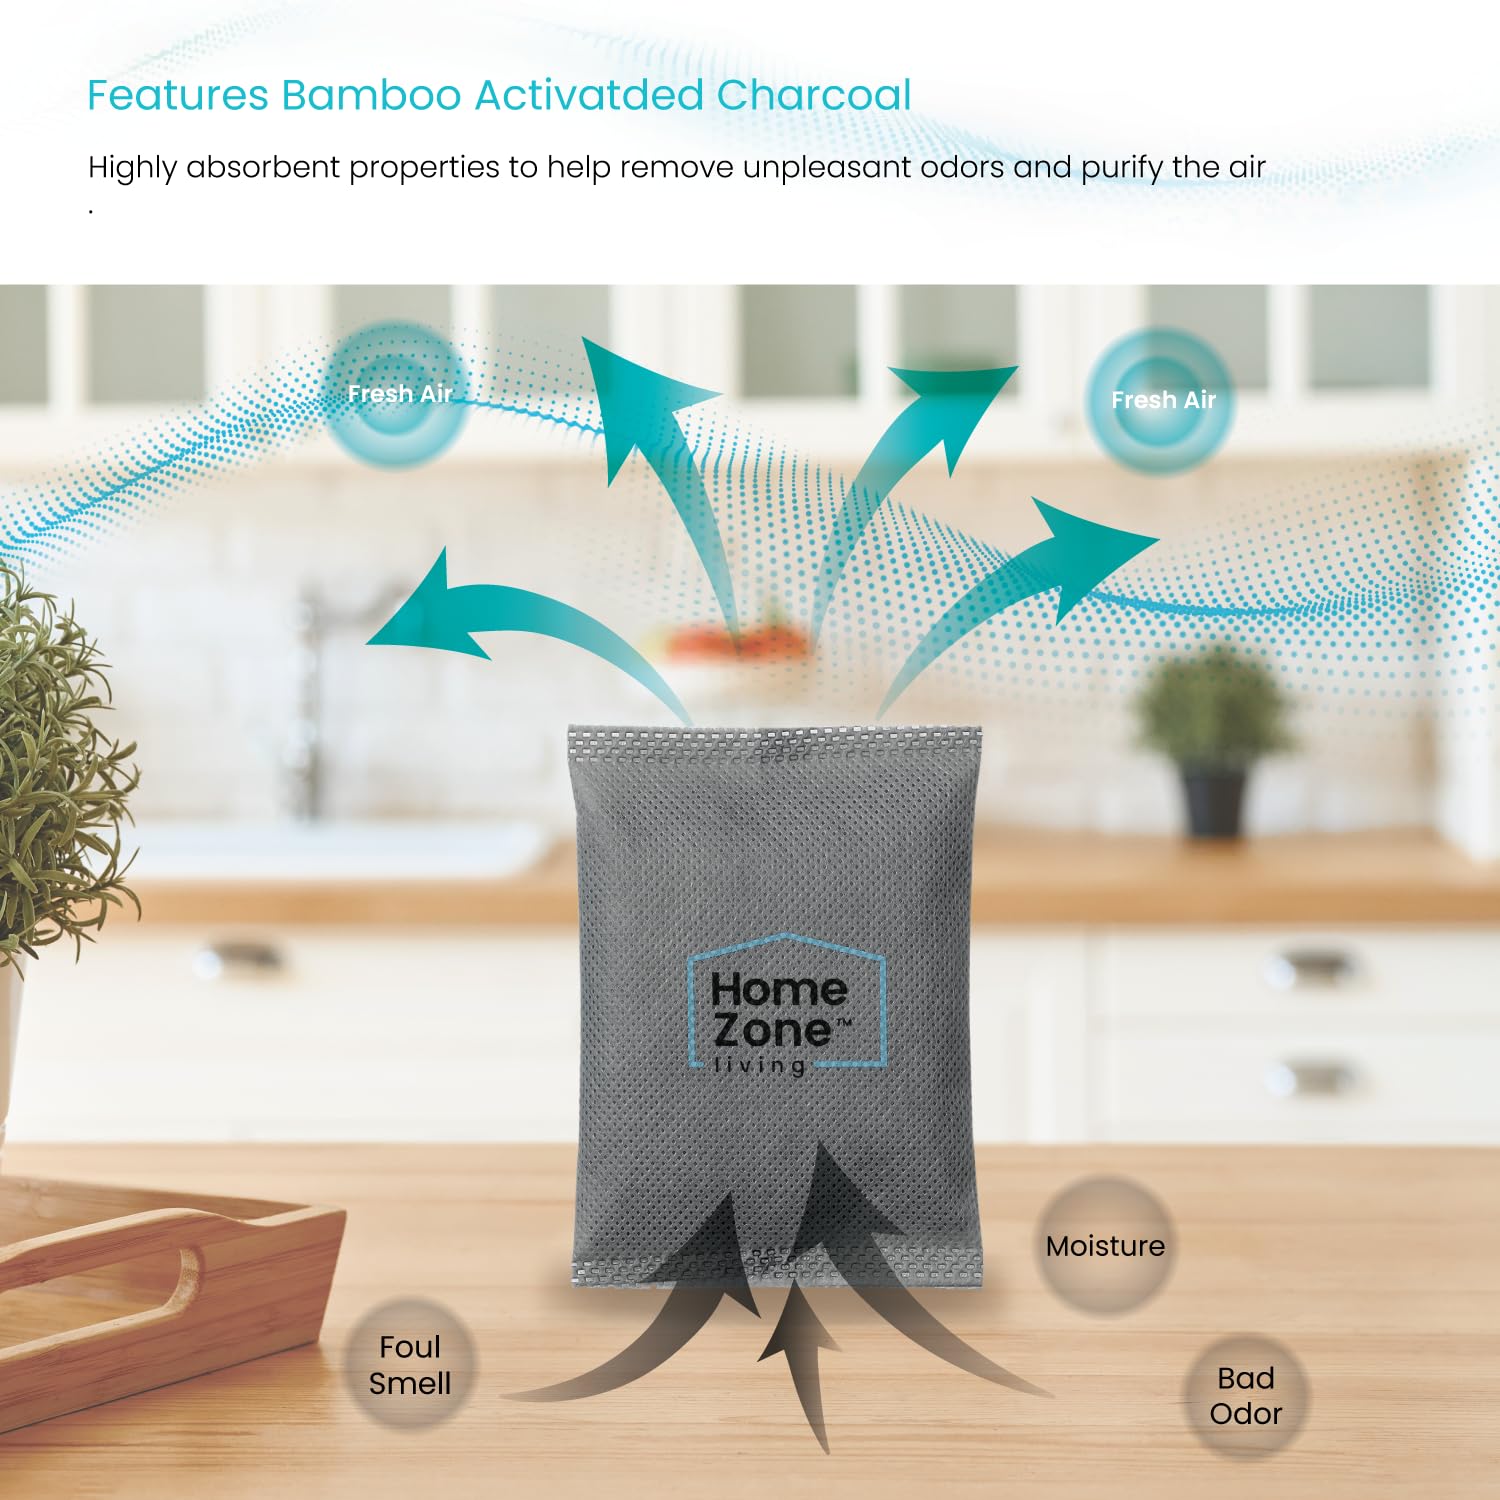 Home Zone Living CleanAura Deodorizing Bamboo Activated Charcoal Filter Bag Set of 4